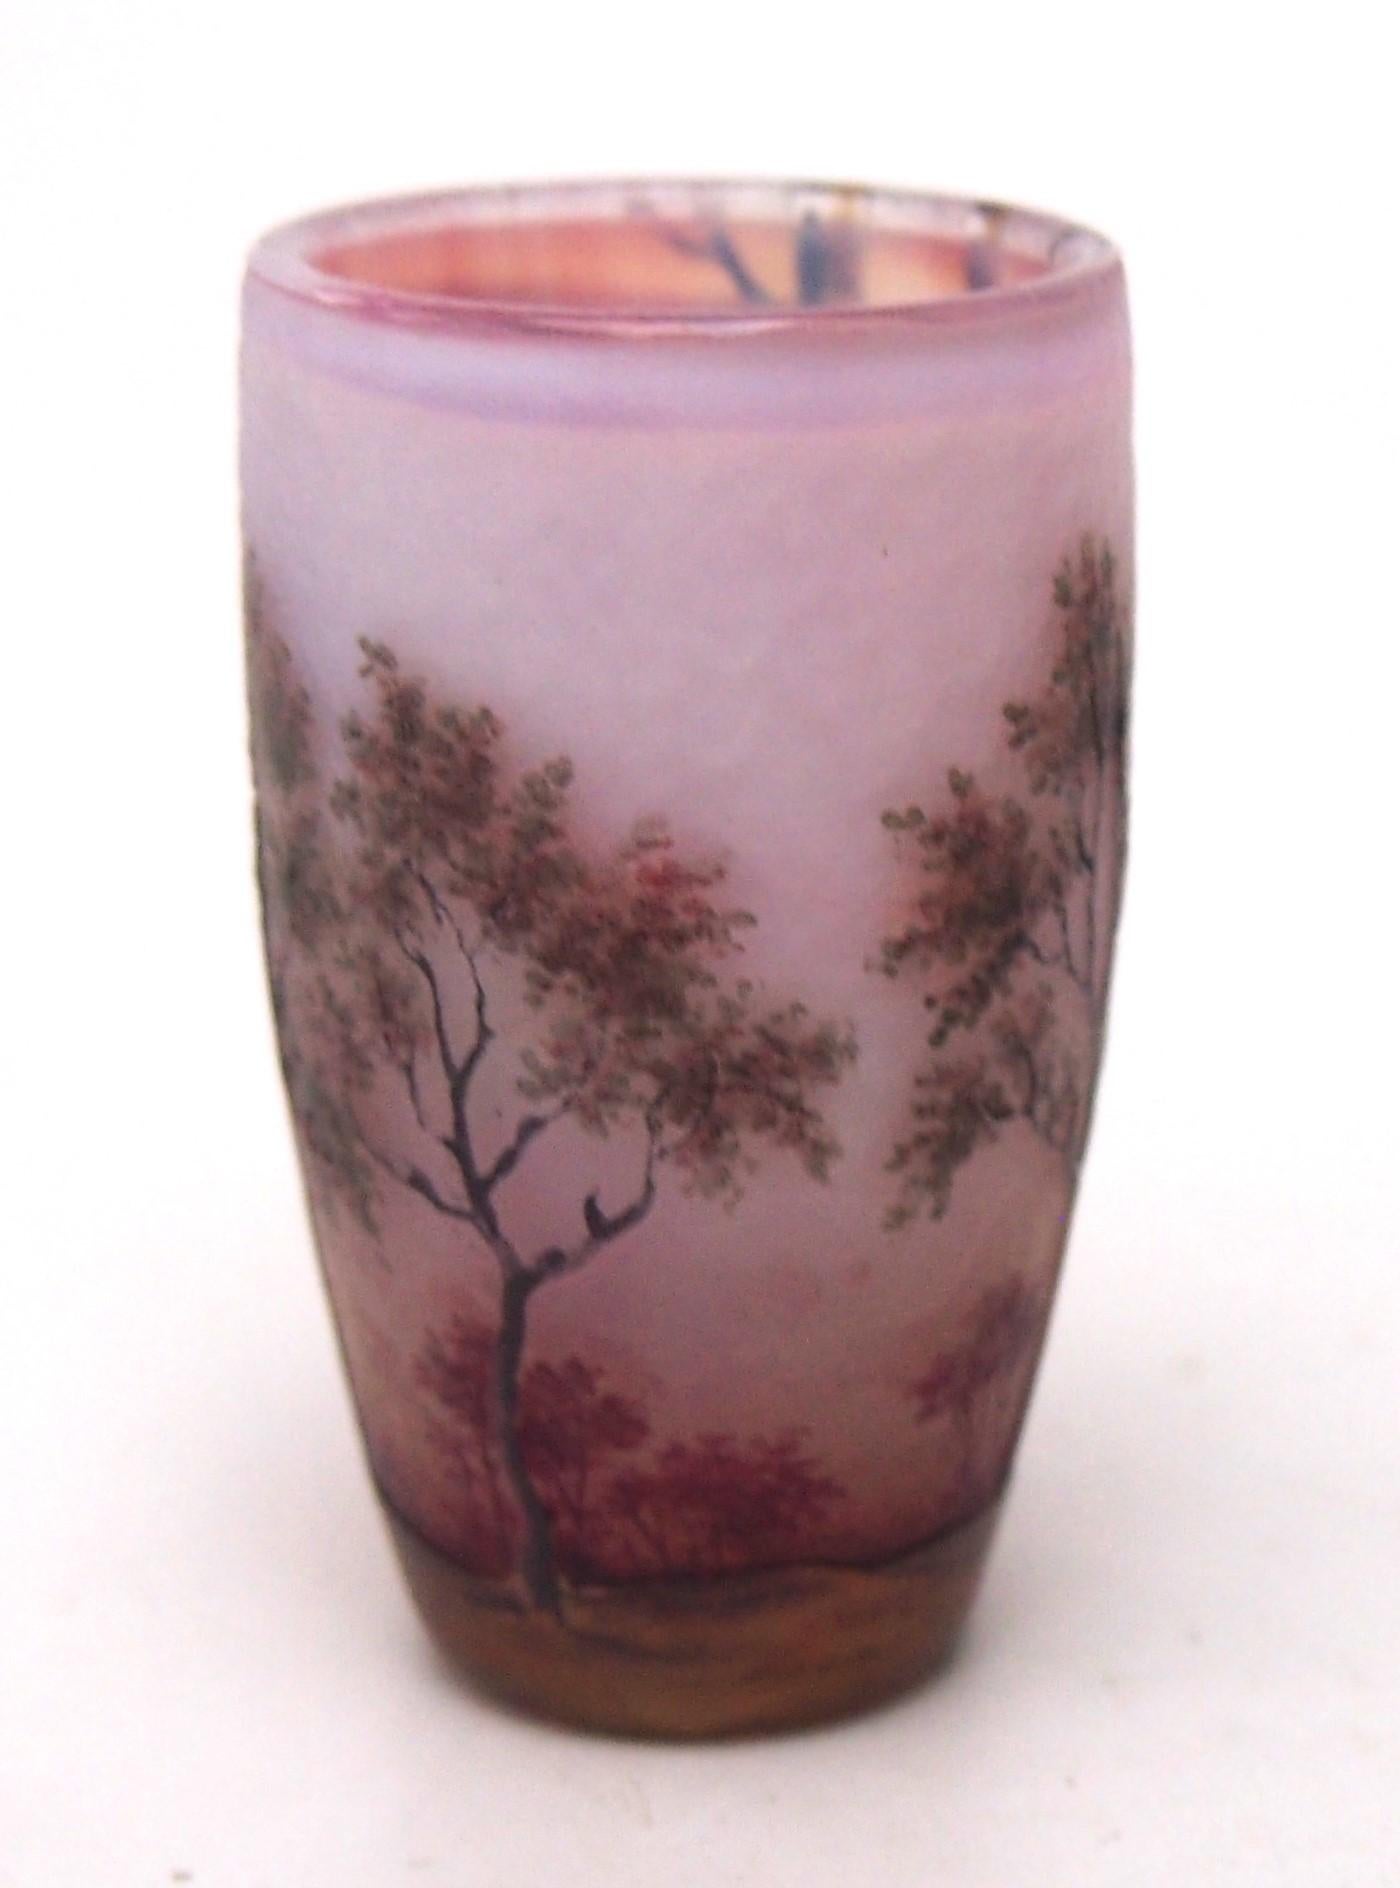 Near miniature Daum Spring Scene vase -Polychrome enamelled and cameo depicting a spring woodland scene with newly sprouting trees against an early morning pink sunrise.  It is the size of a tall thimble. Daum miniatures like these are avidly